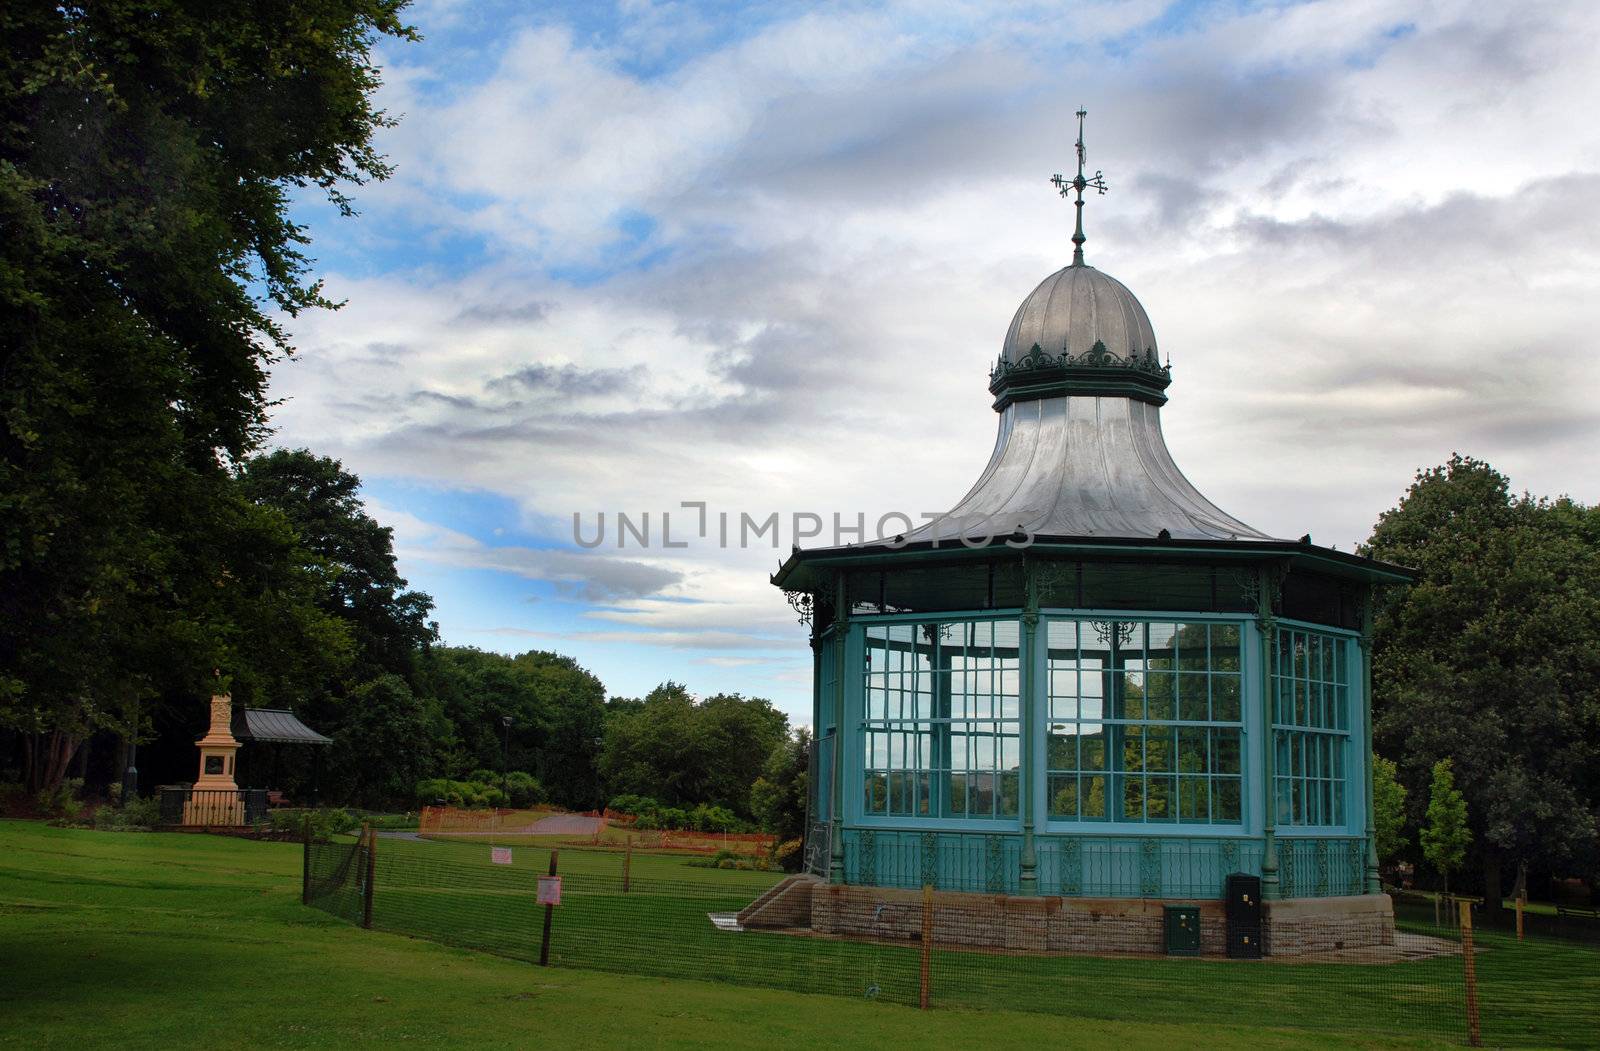 Blue Bandstand by pwillitts